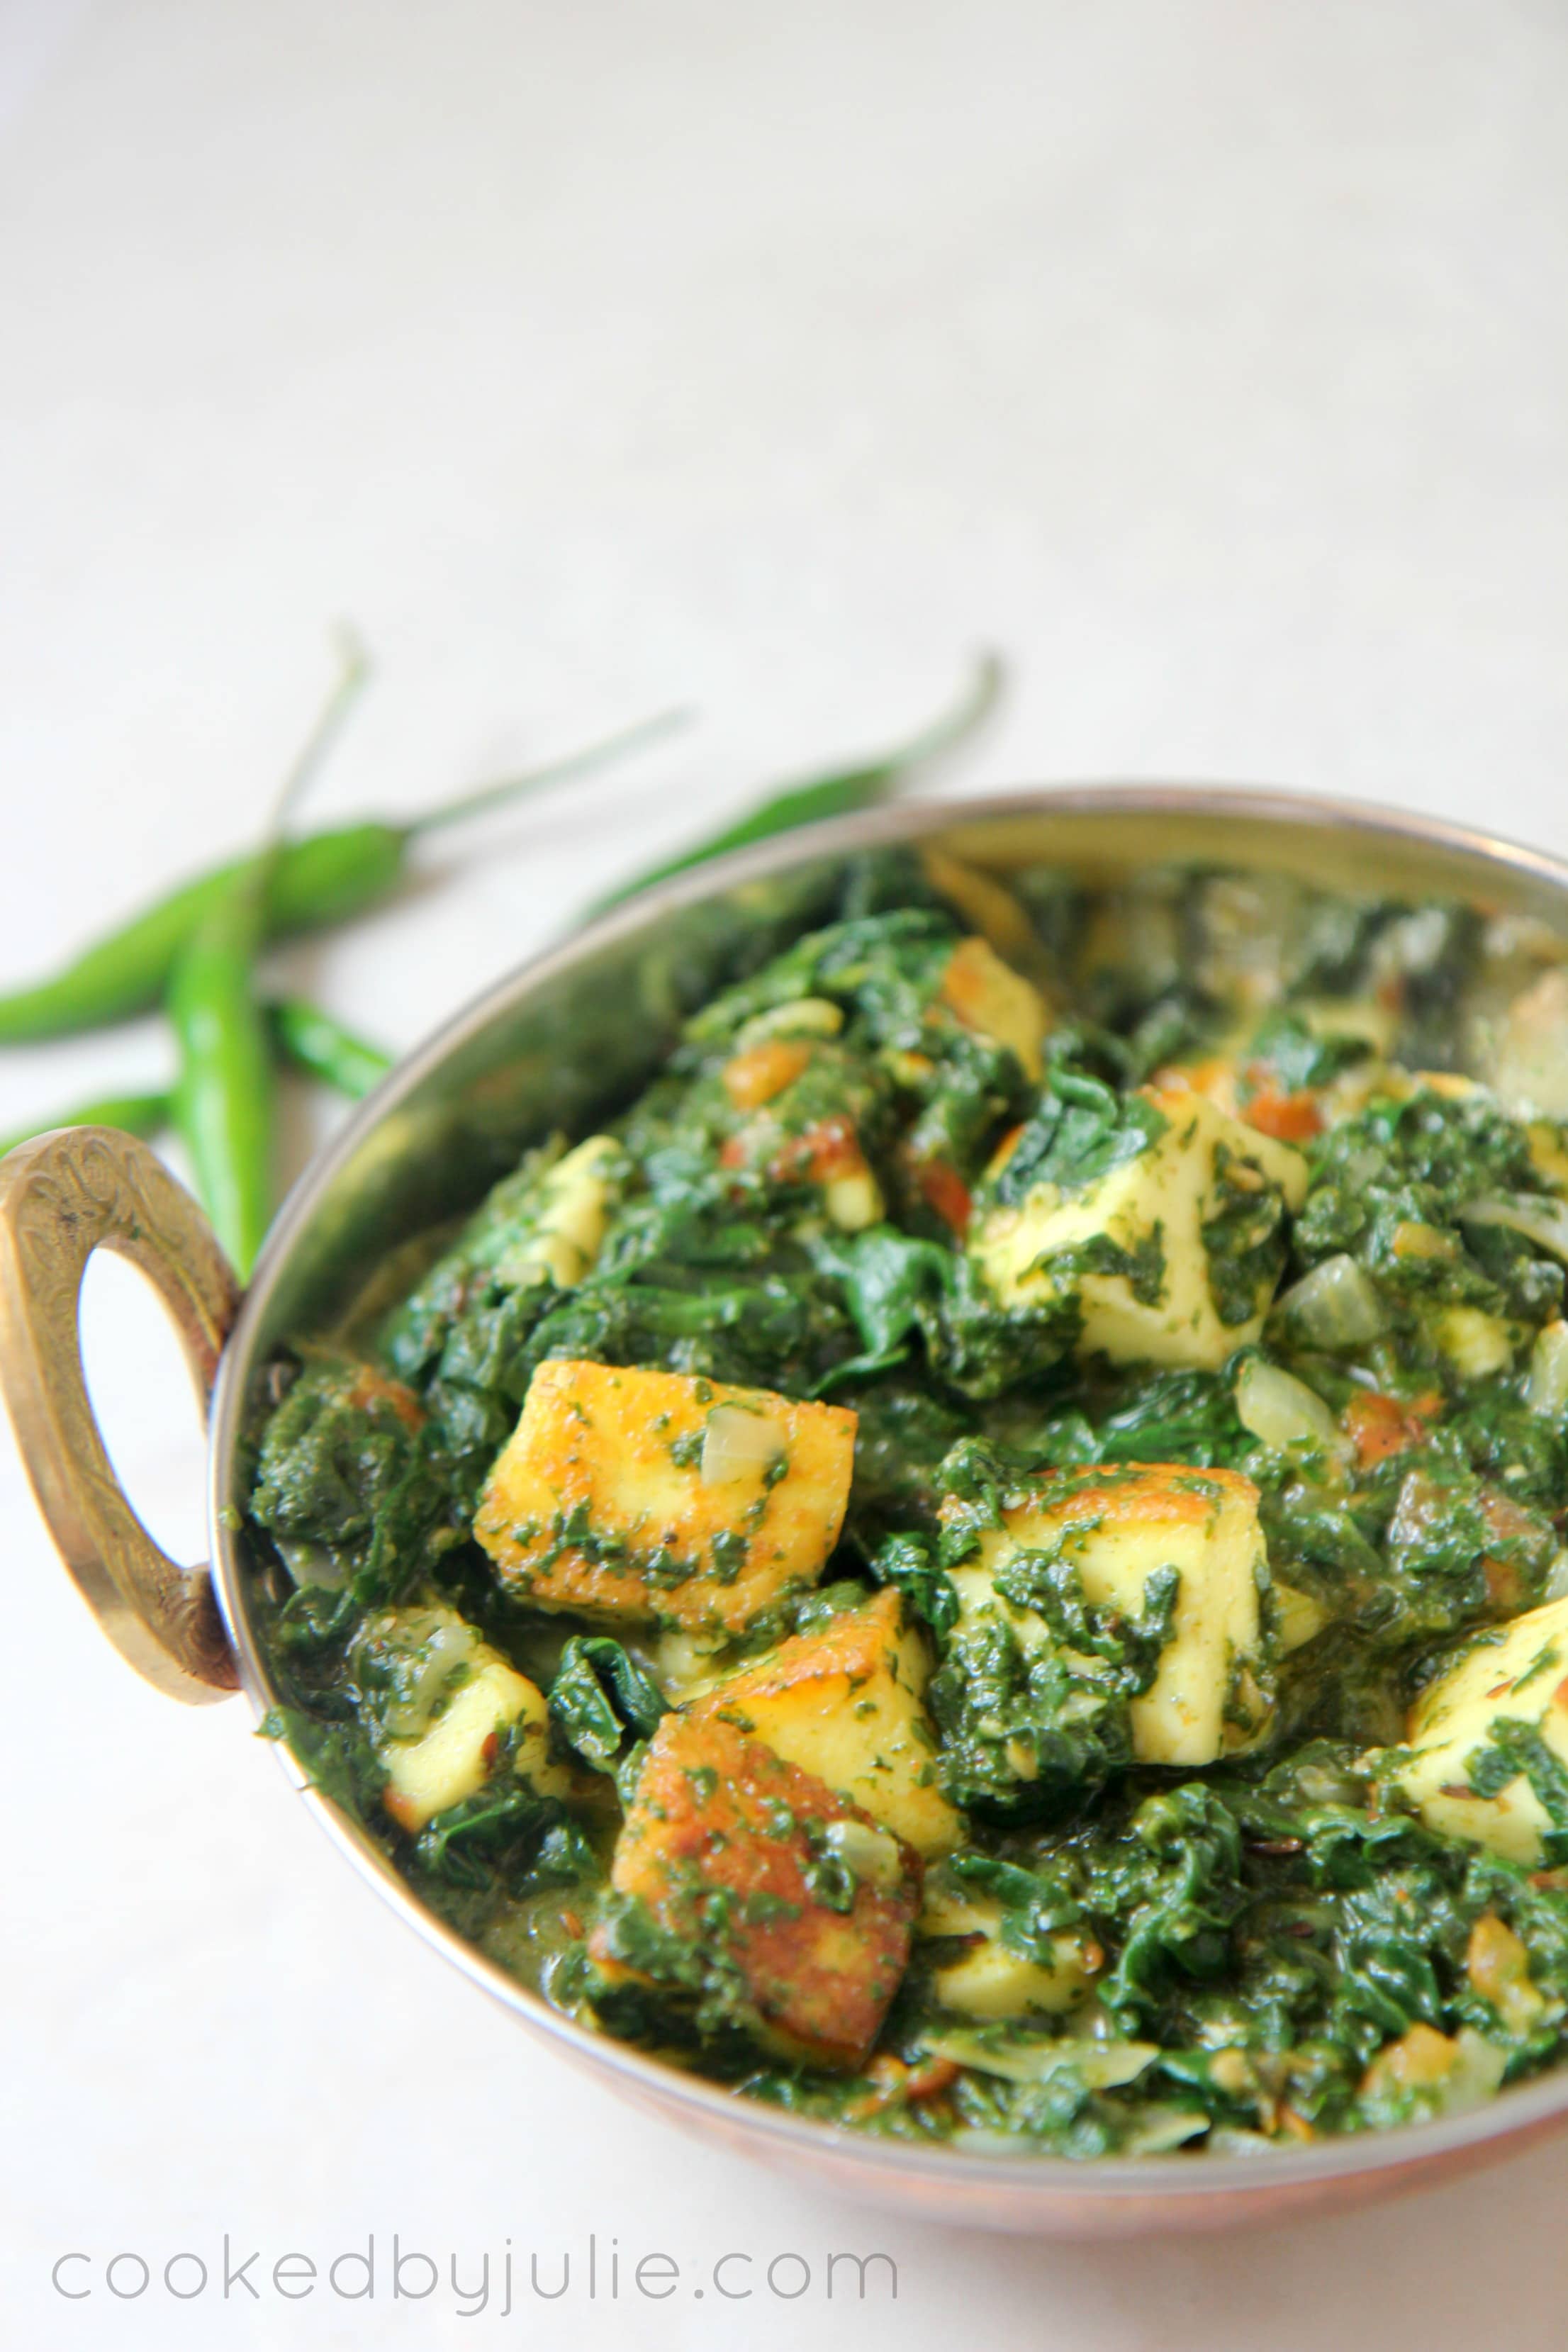 Saag paneer in a gold small dish with green chilies on the side